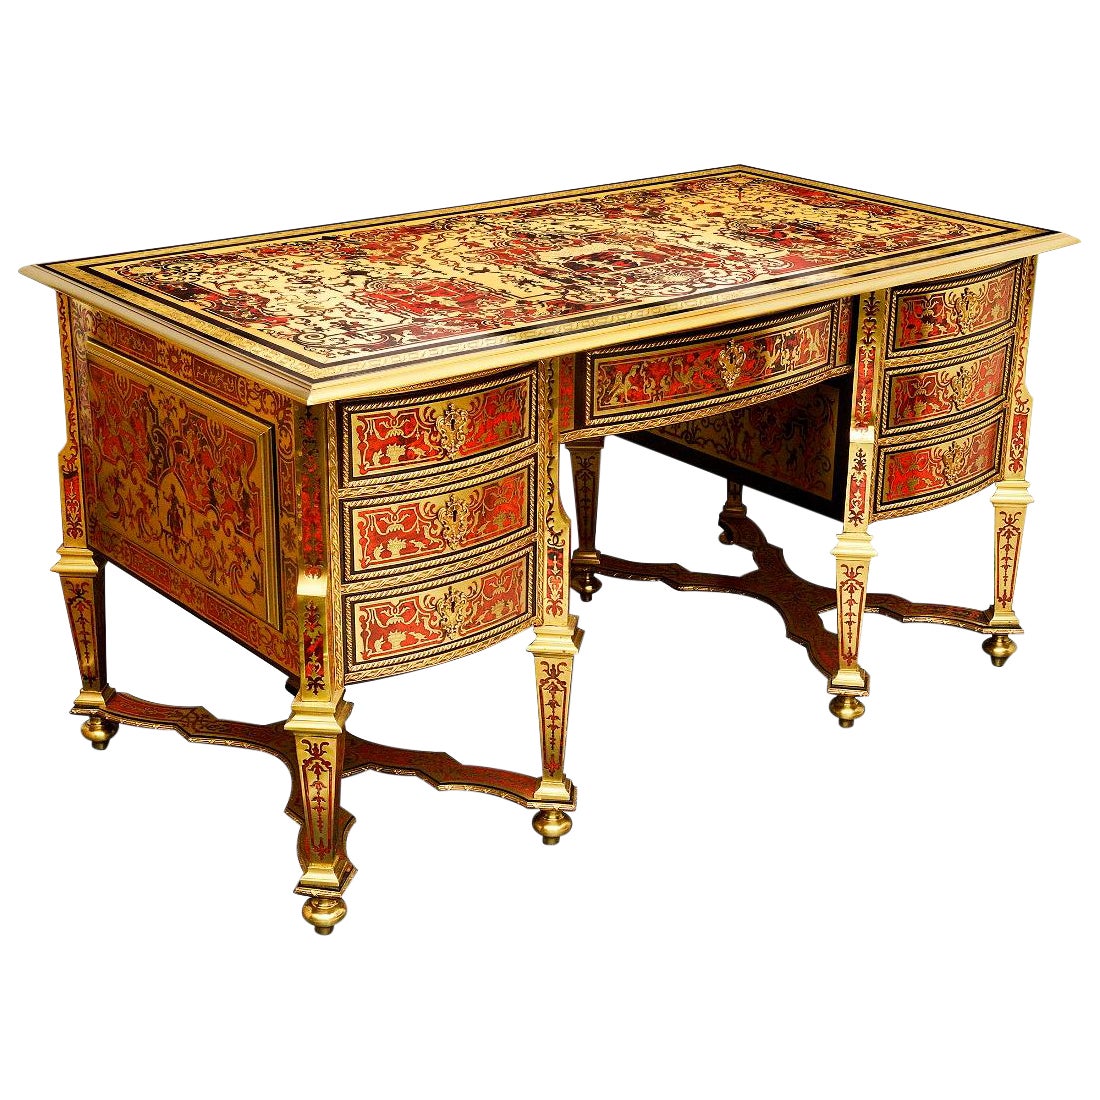 19th Century French Boulle Louis XVI Style Mazarin / Desk For Sale